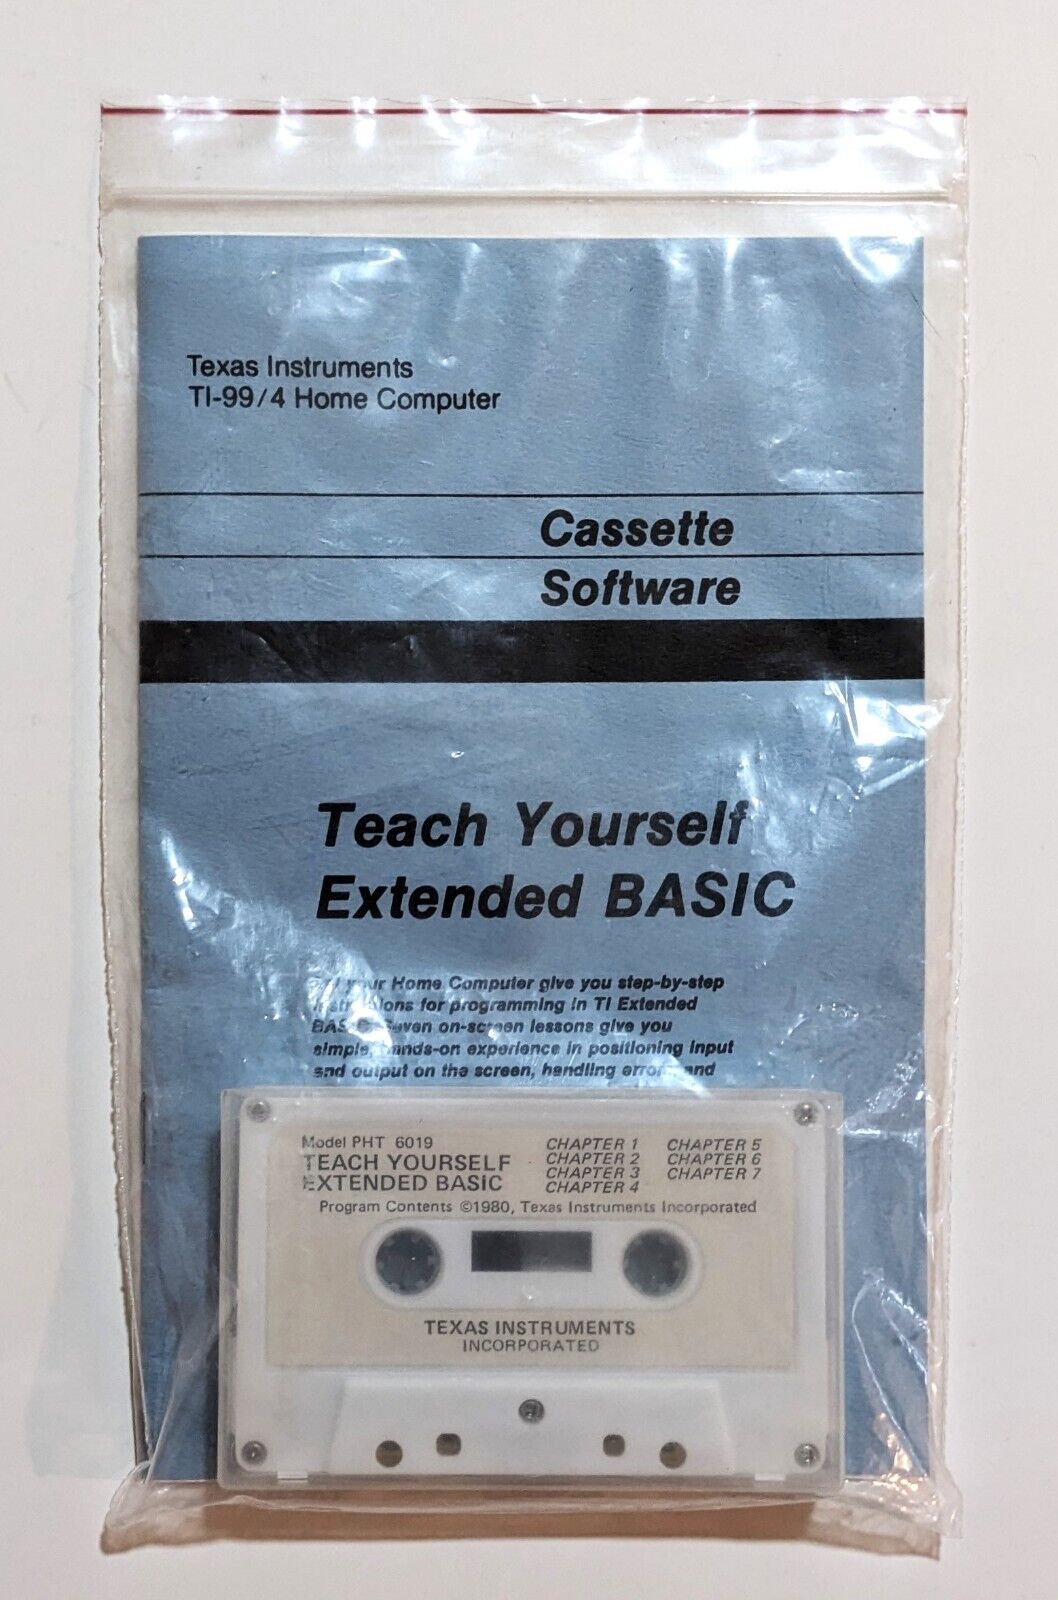 Teach Yourself Extended BASIC cassette & manual for TI-99/4A computer